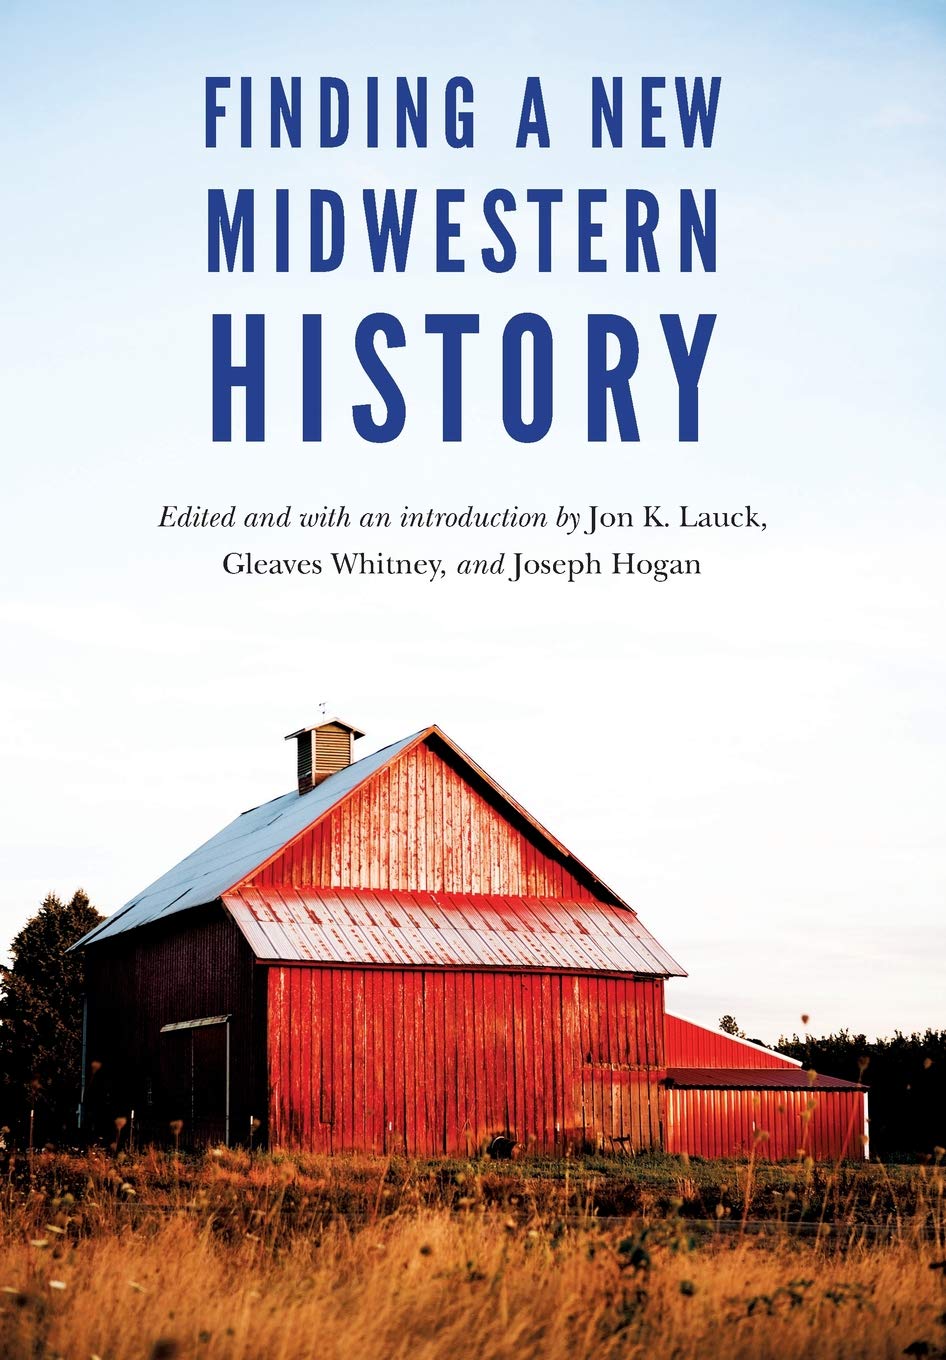 what-makes-the-midwest-midwestern-the-russell-kirk-center